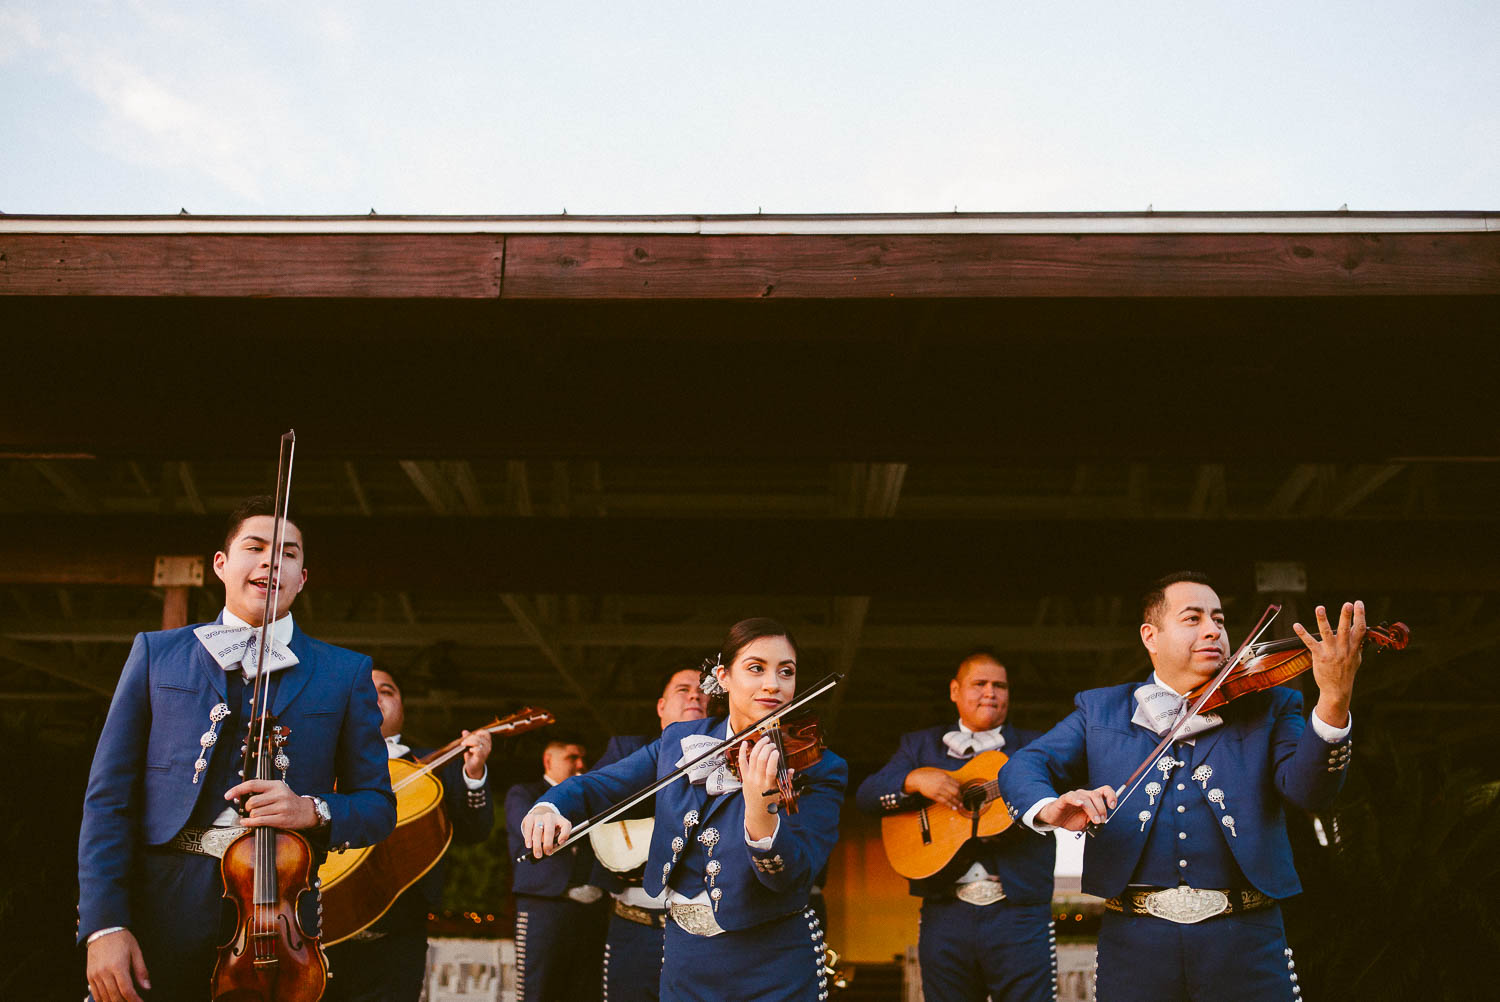 Mariachi's play welcome music at wedding reception granberry-hills-weddings-philip-thomas-photography